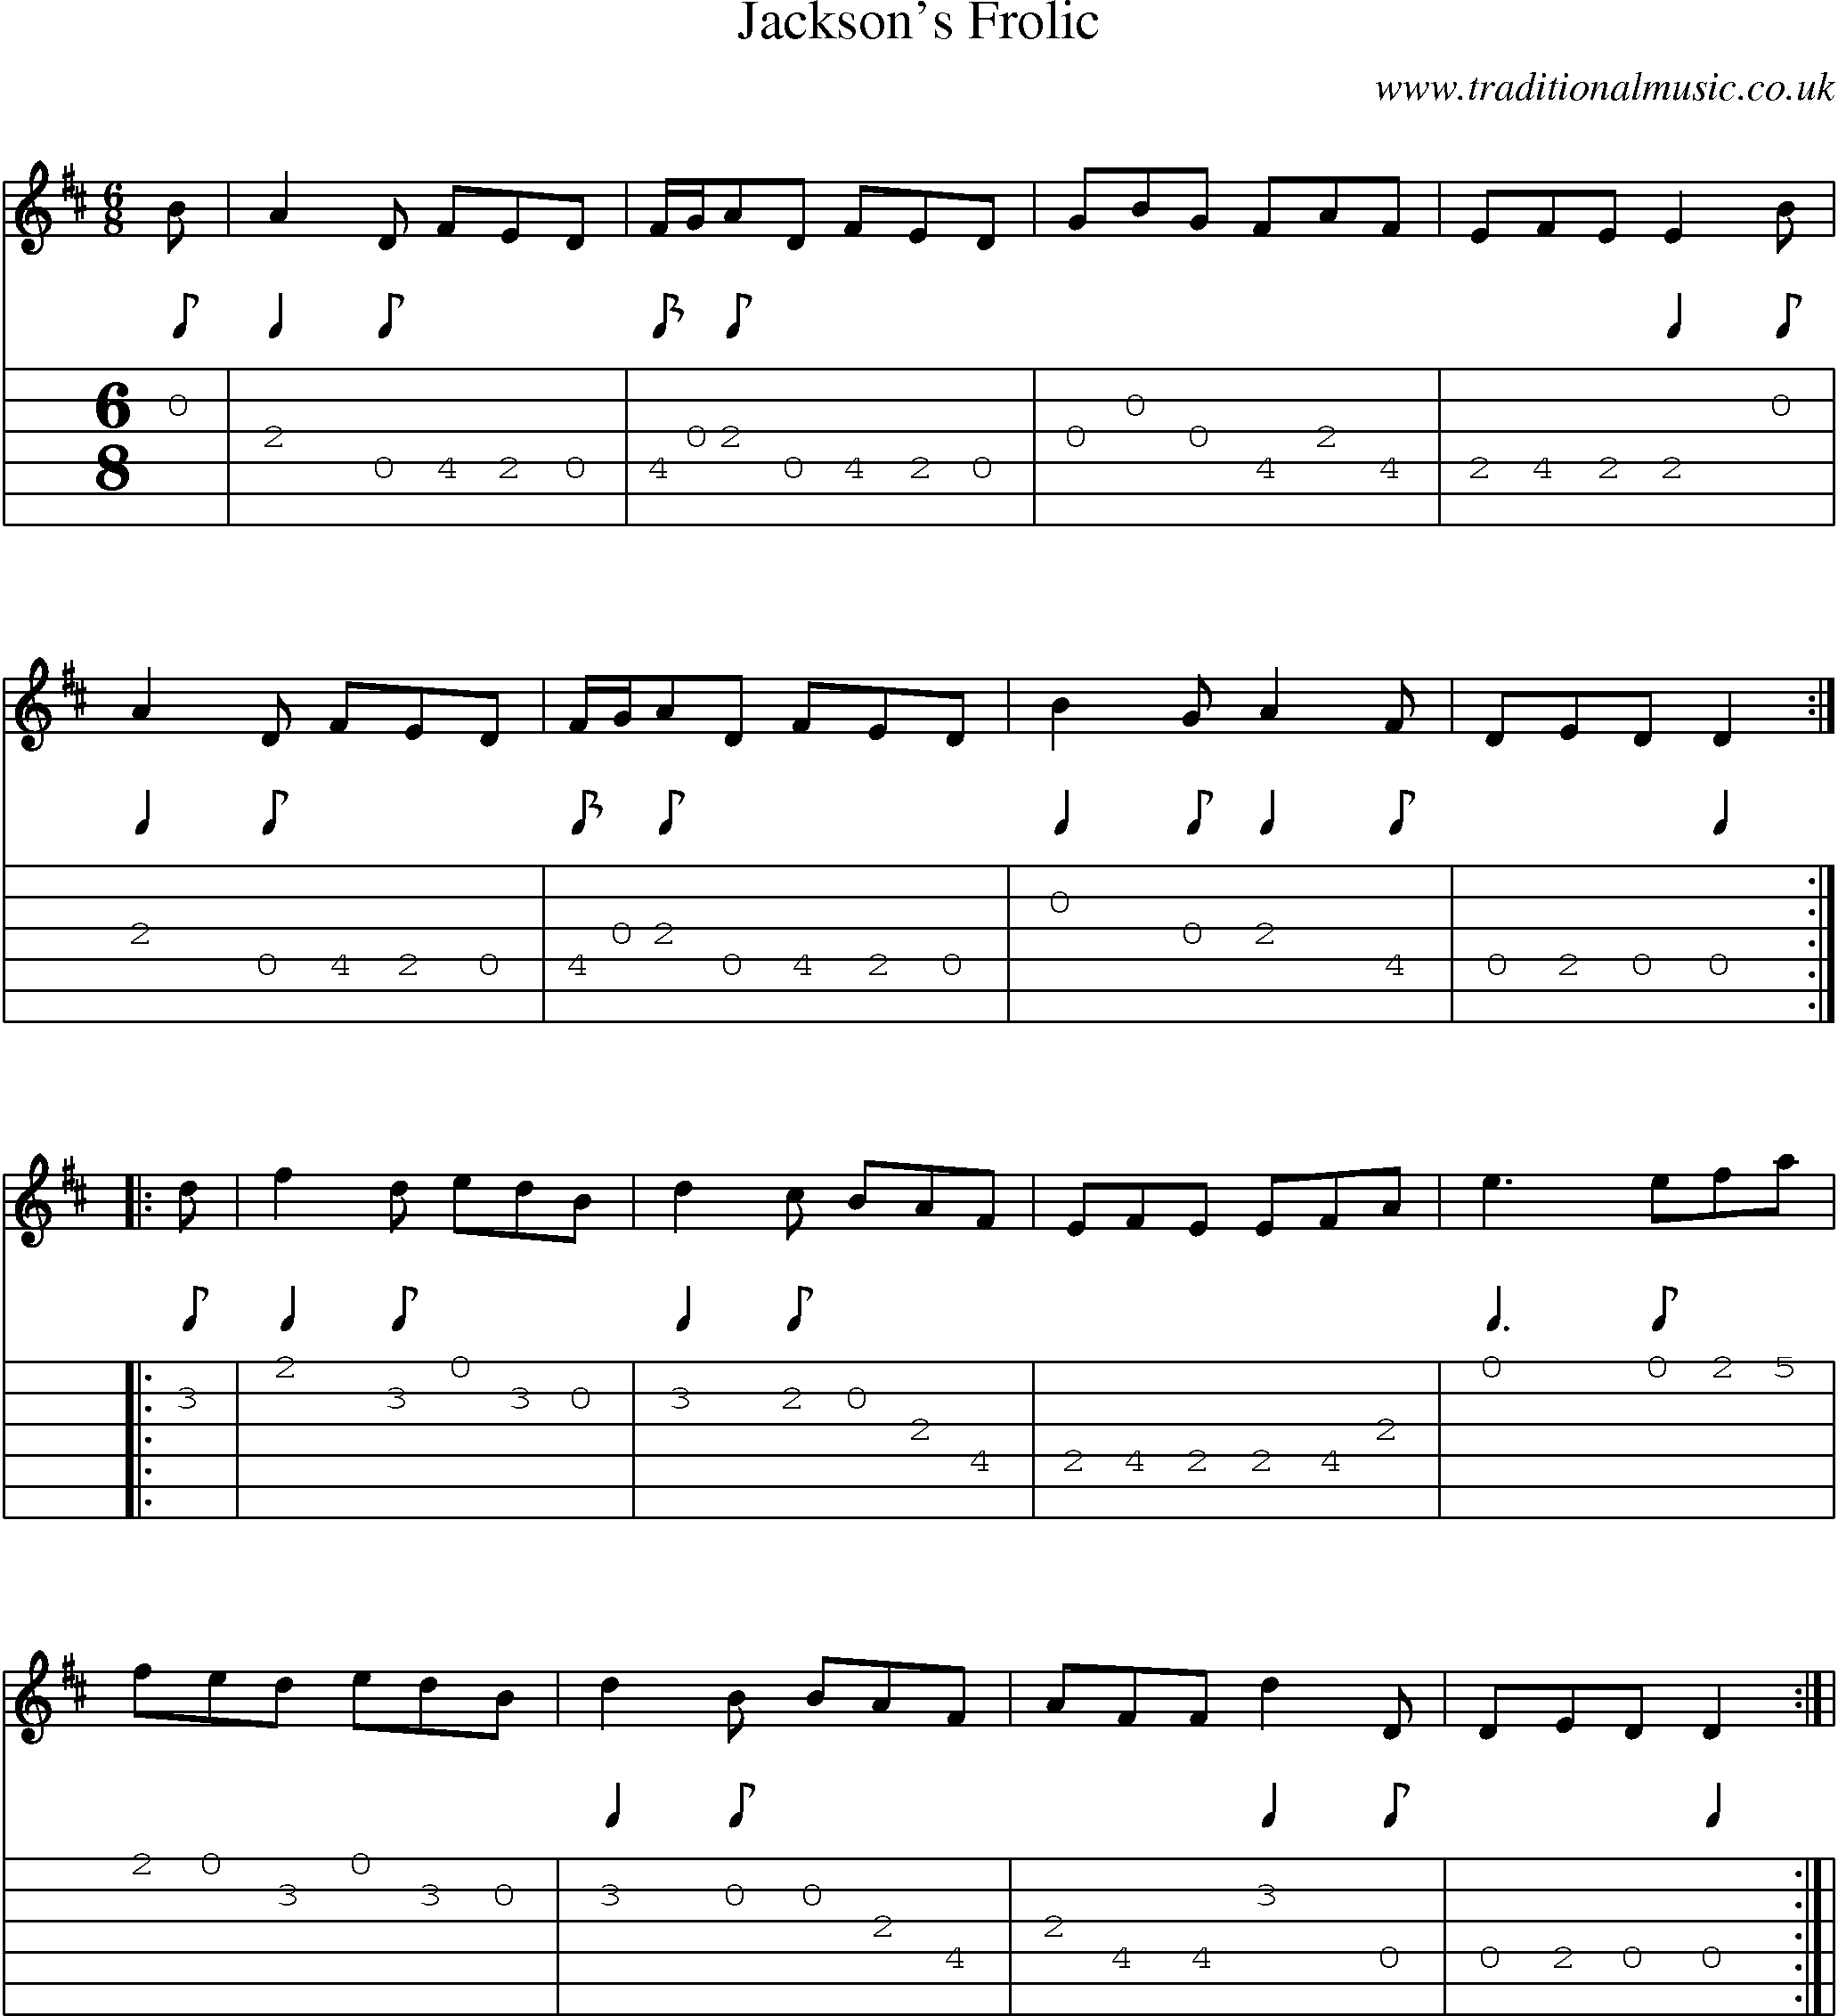 Music Score and Guitar Tabs for Jacksons Frolic